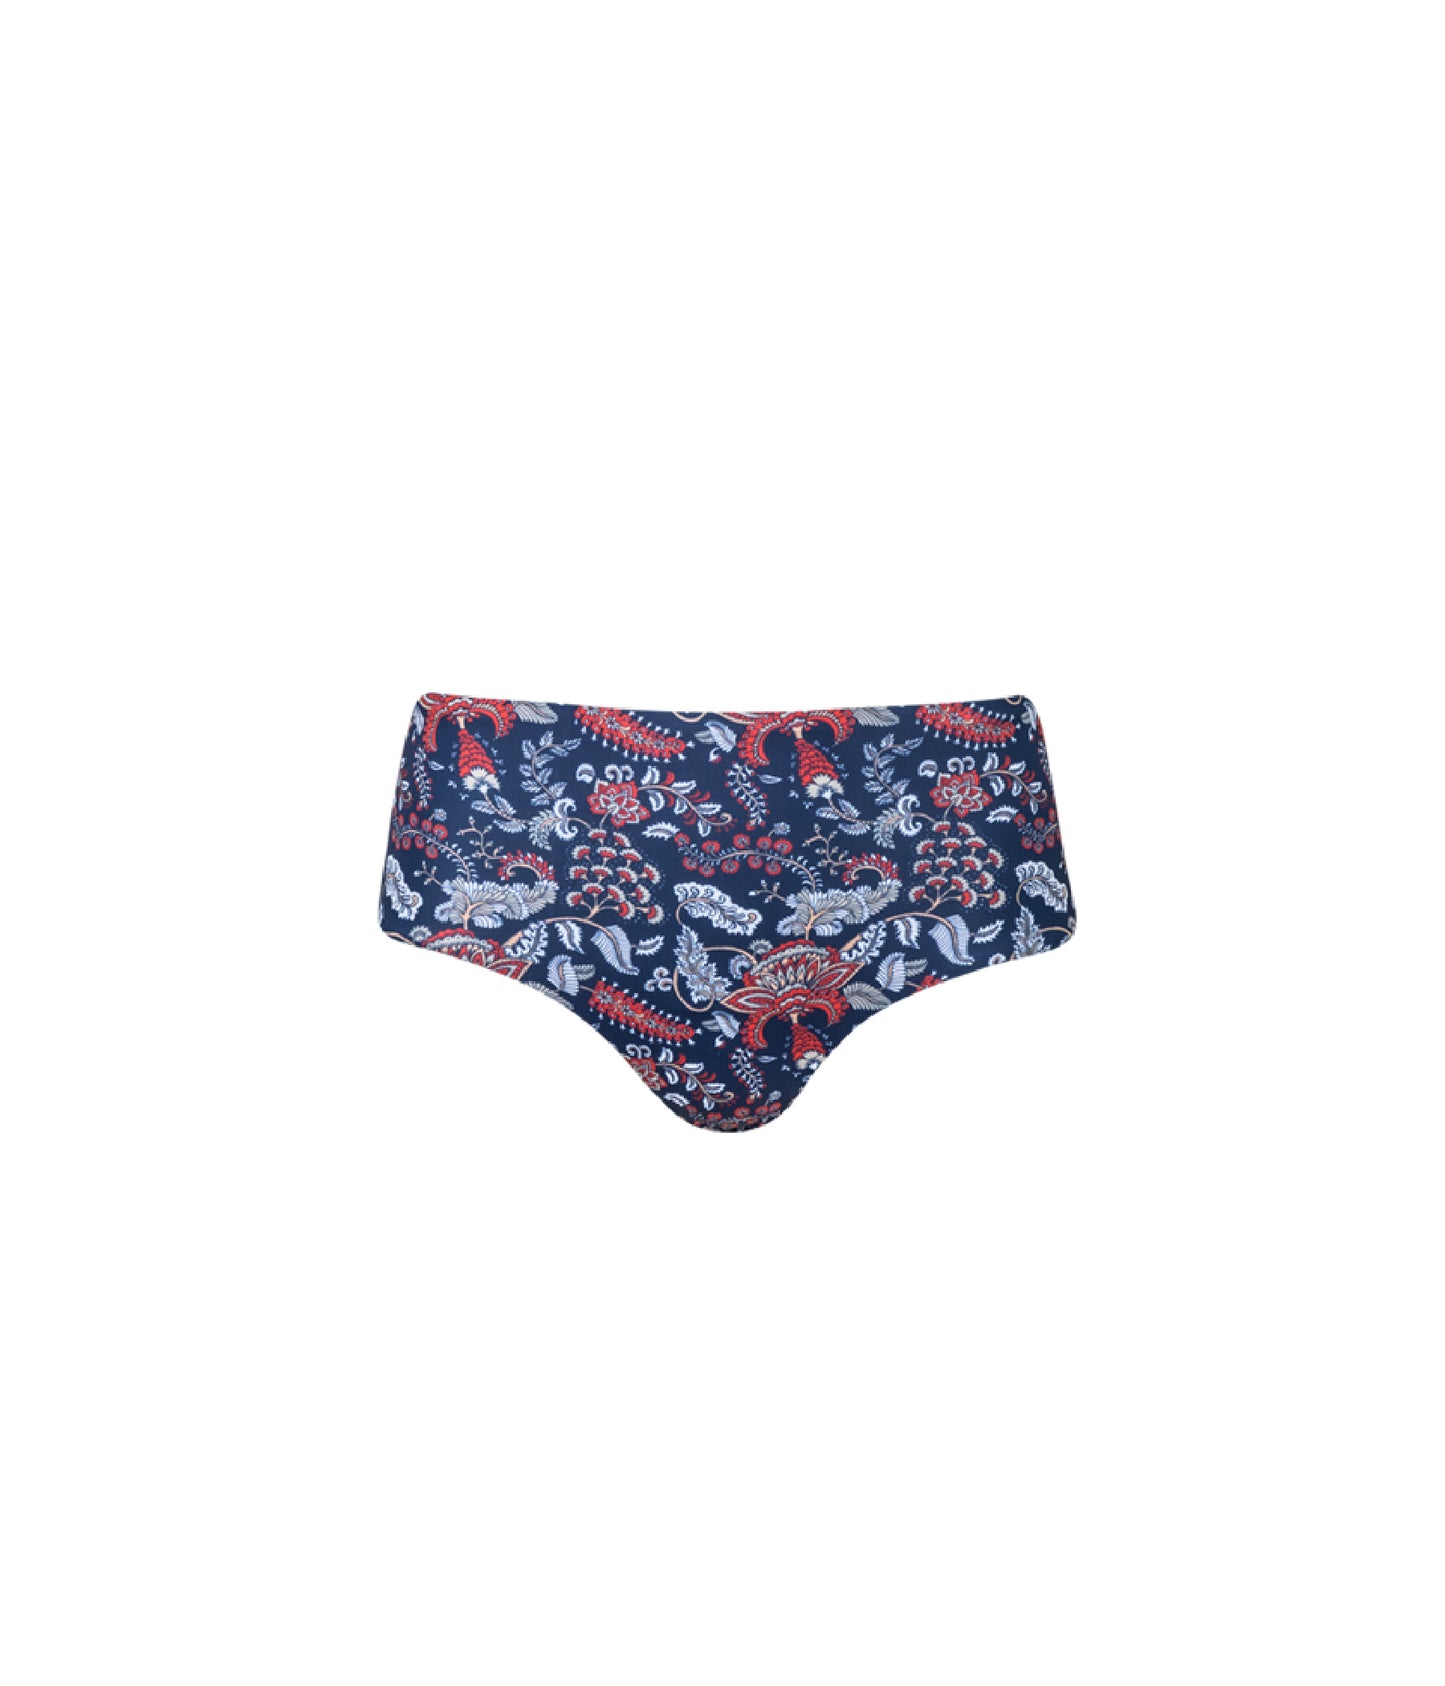 Load image into Gallery viewer, Verdelimon - Bikini Bottom - Angeles - Printed - Blue Floral - Front
